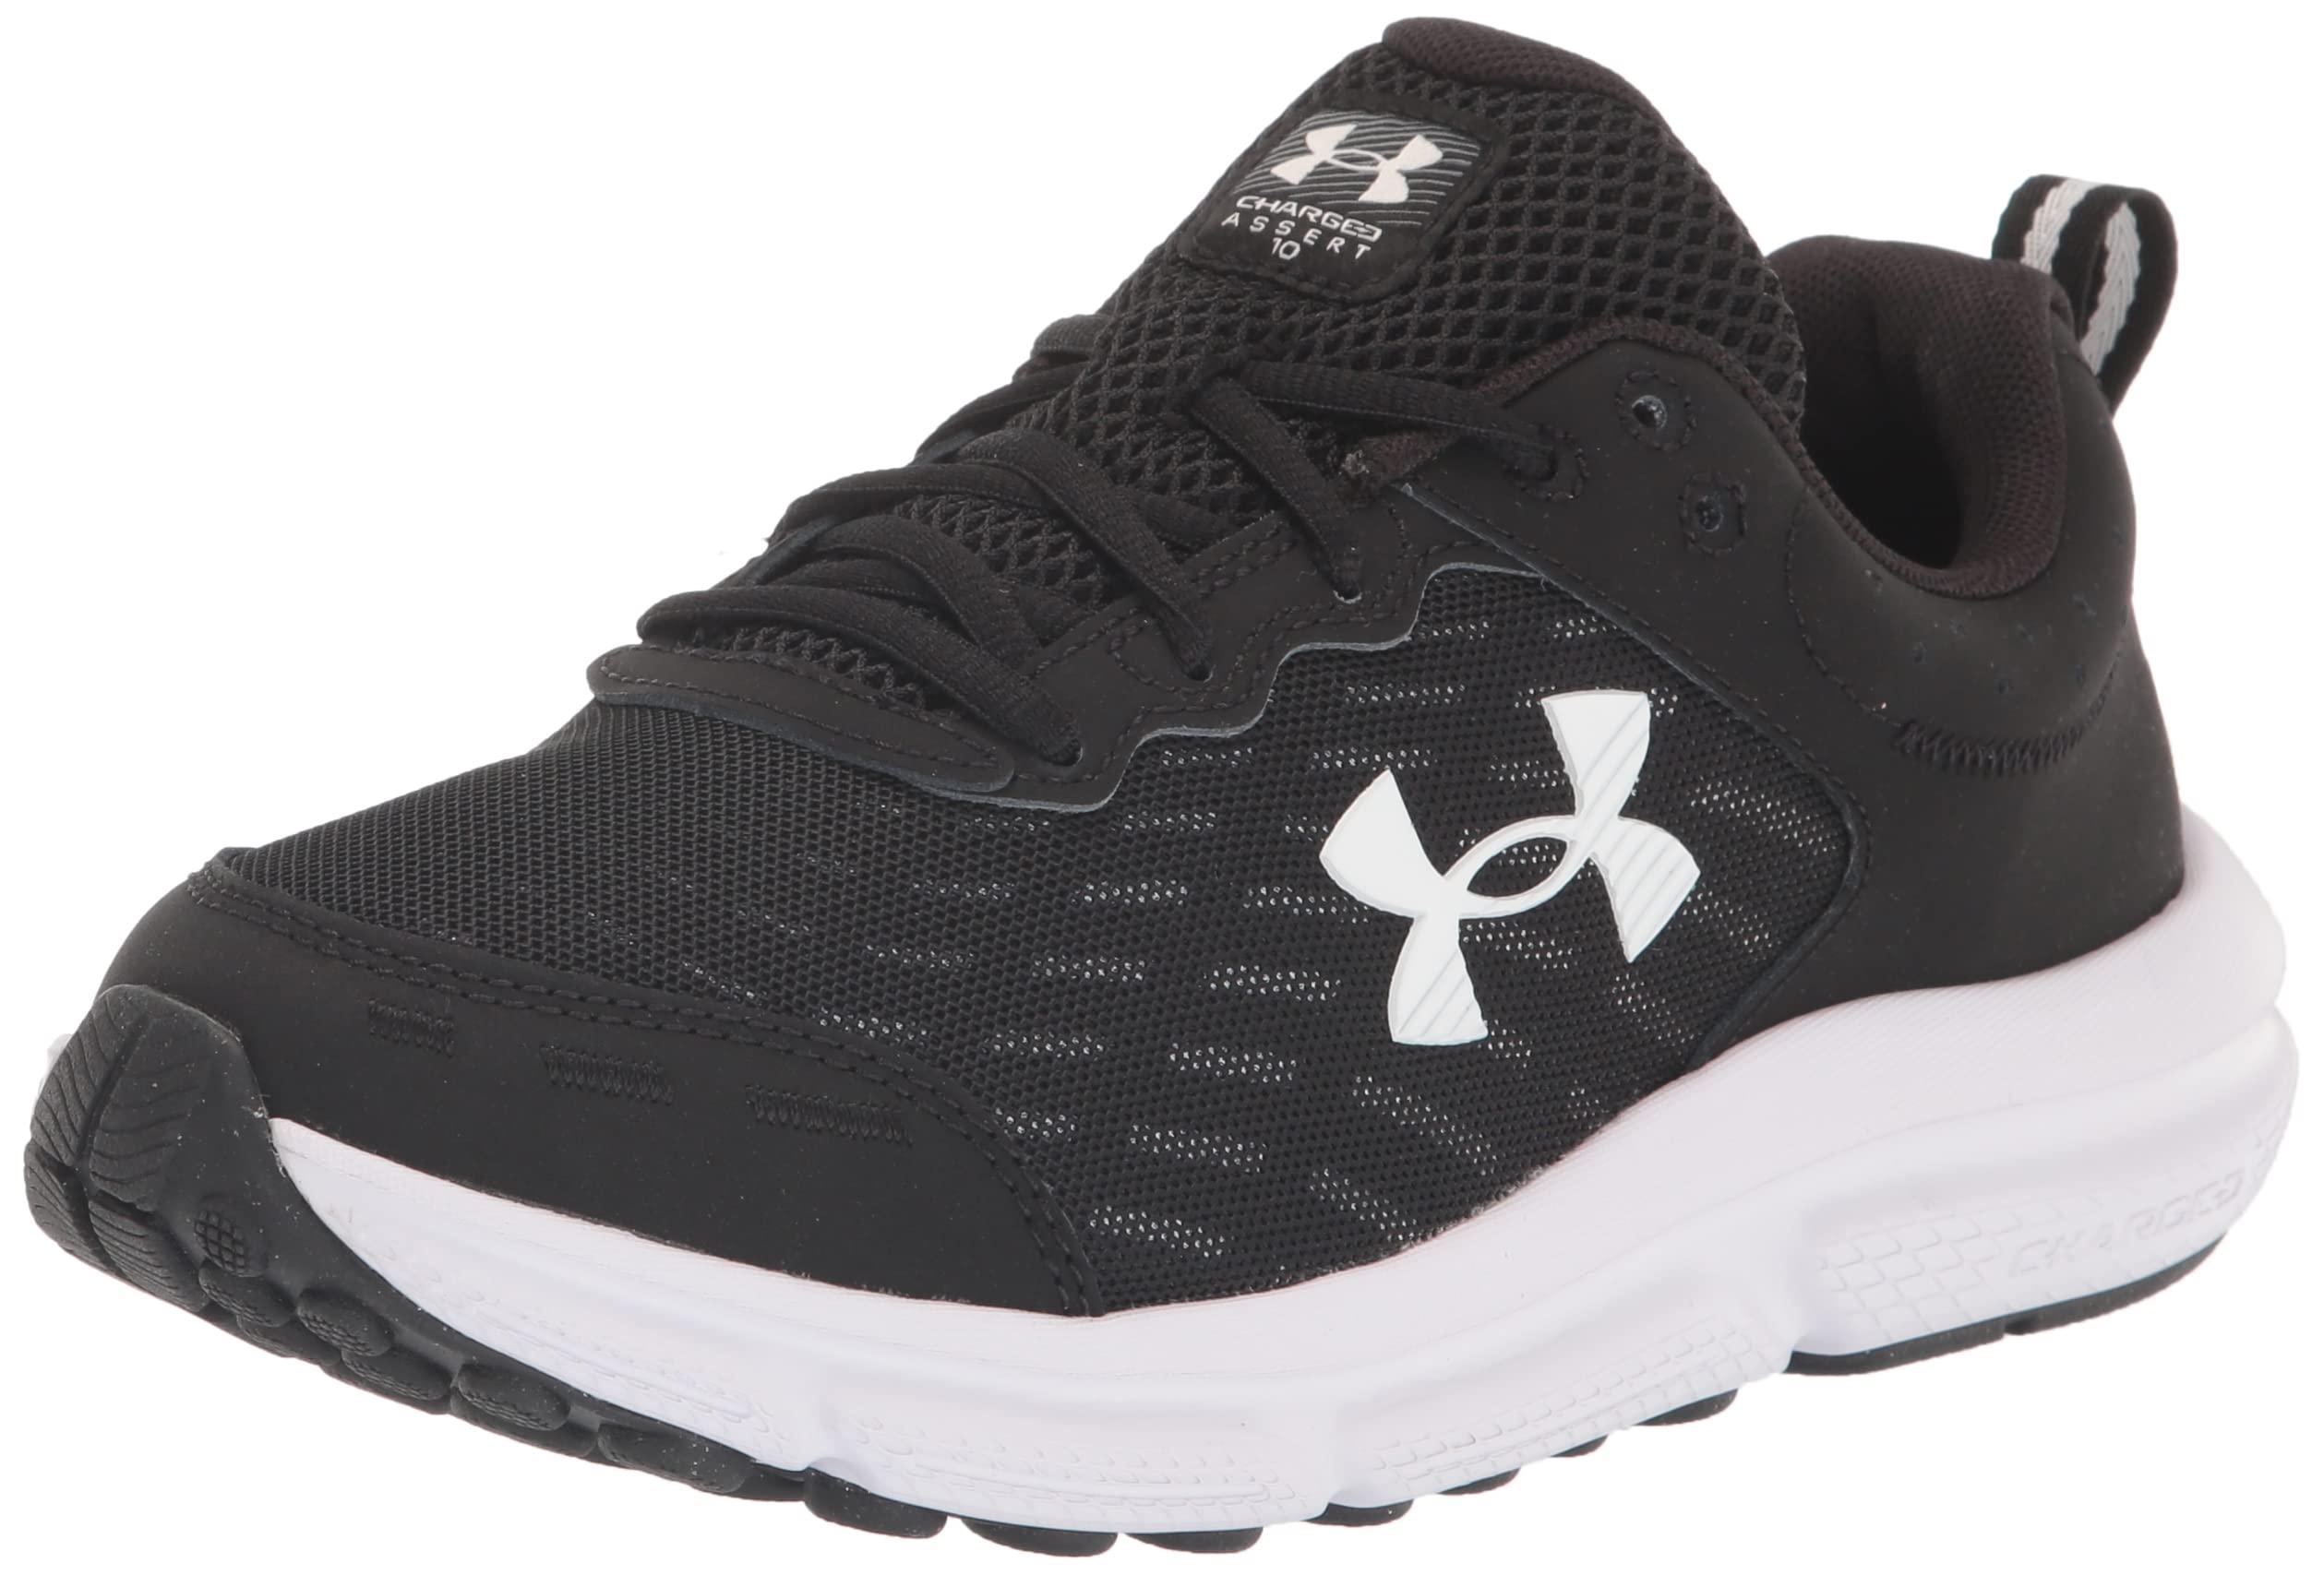 Under Armour Charged Assert 10, in Black for Men